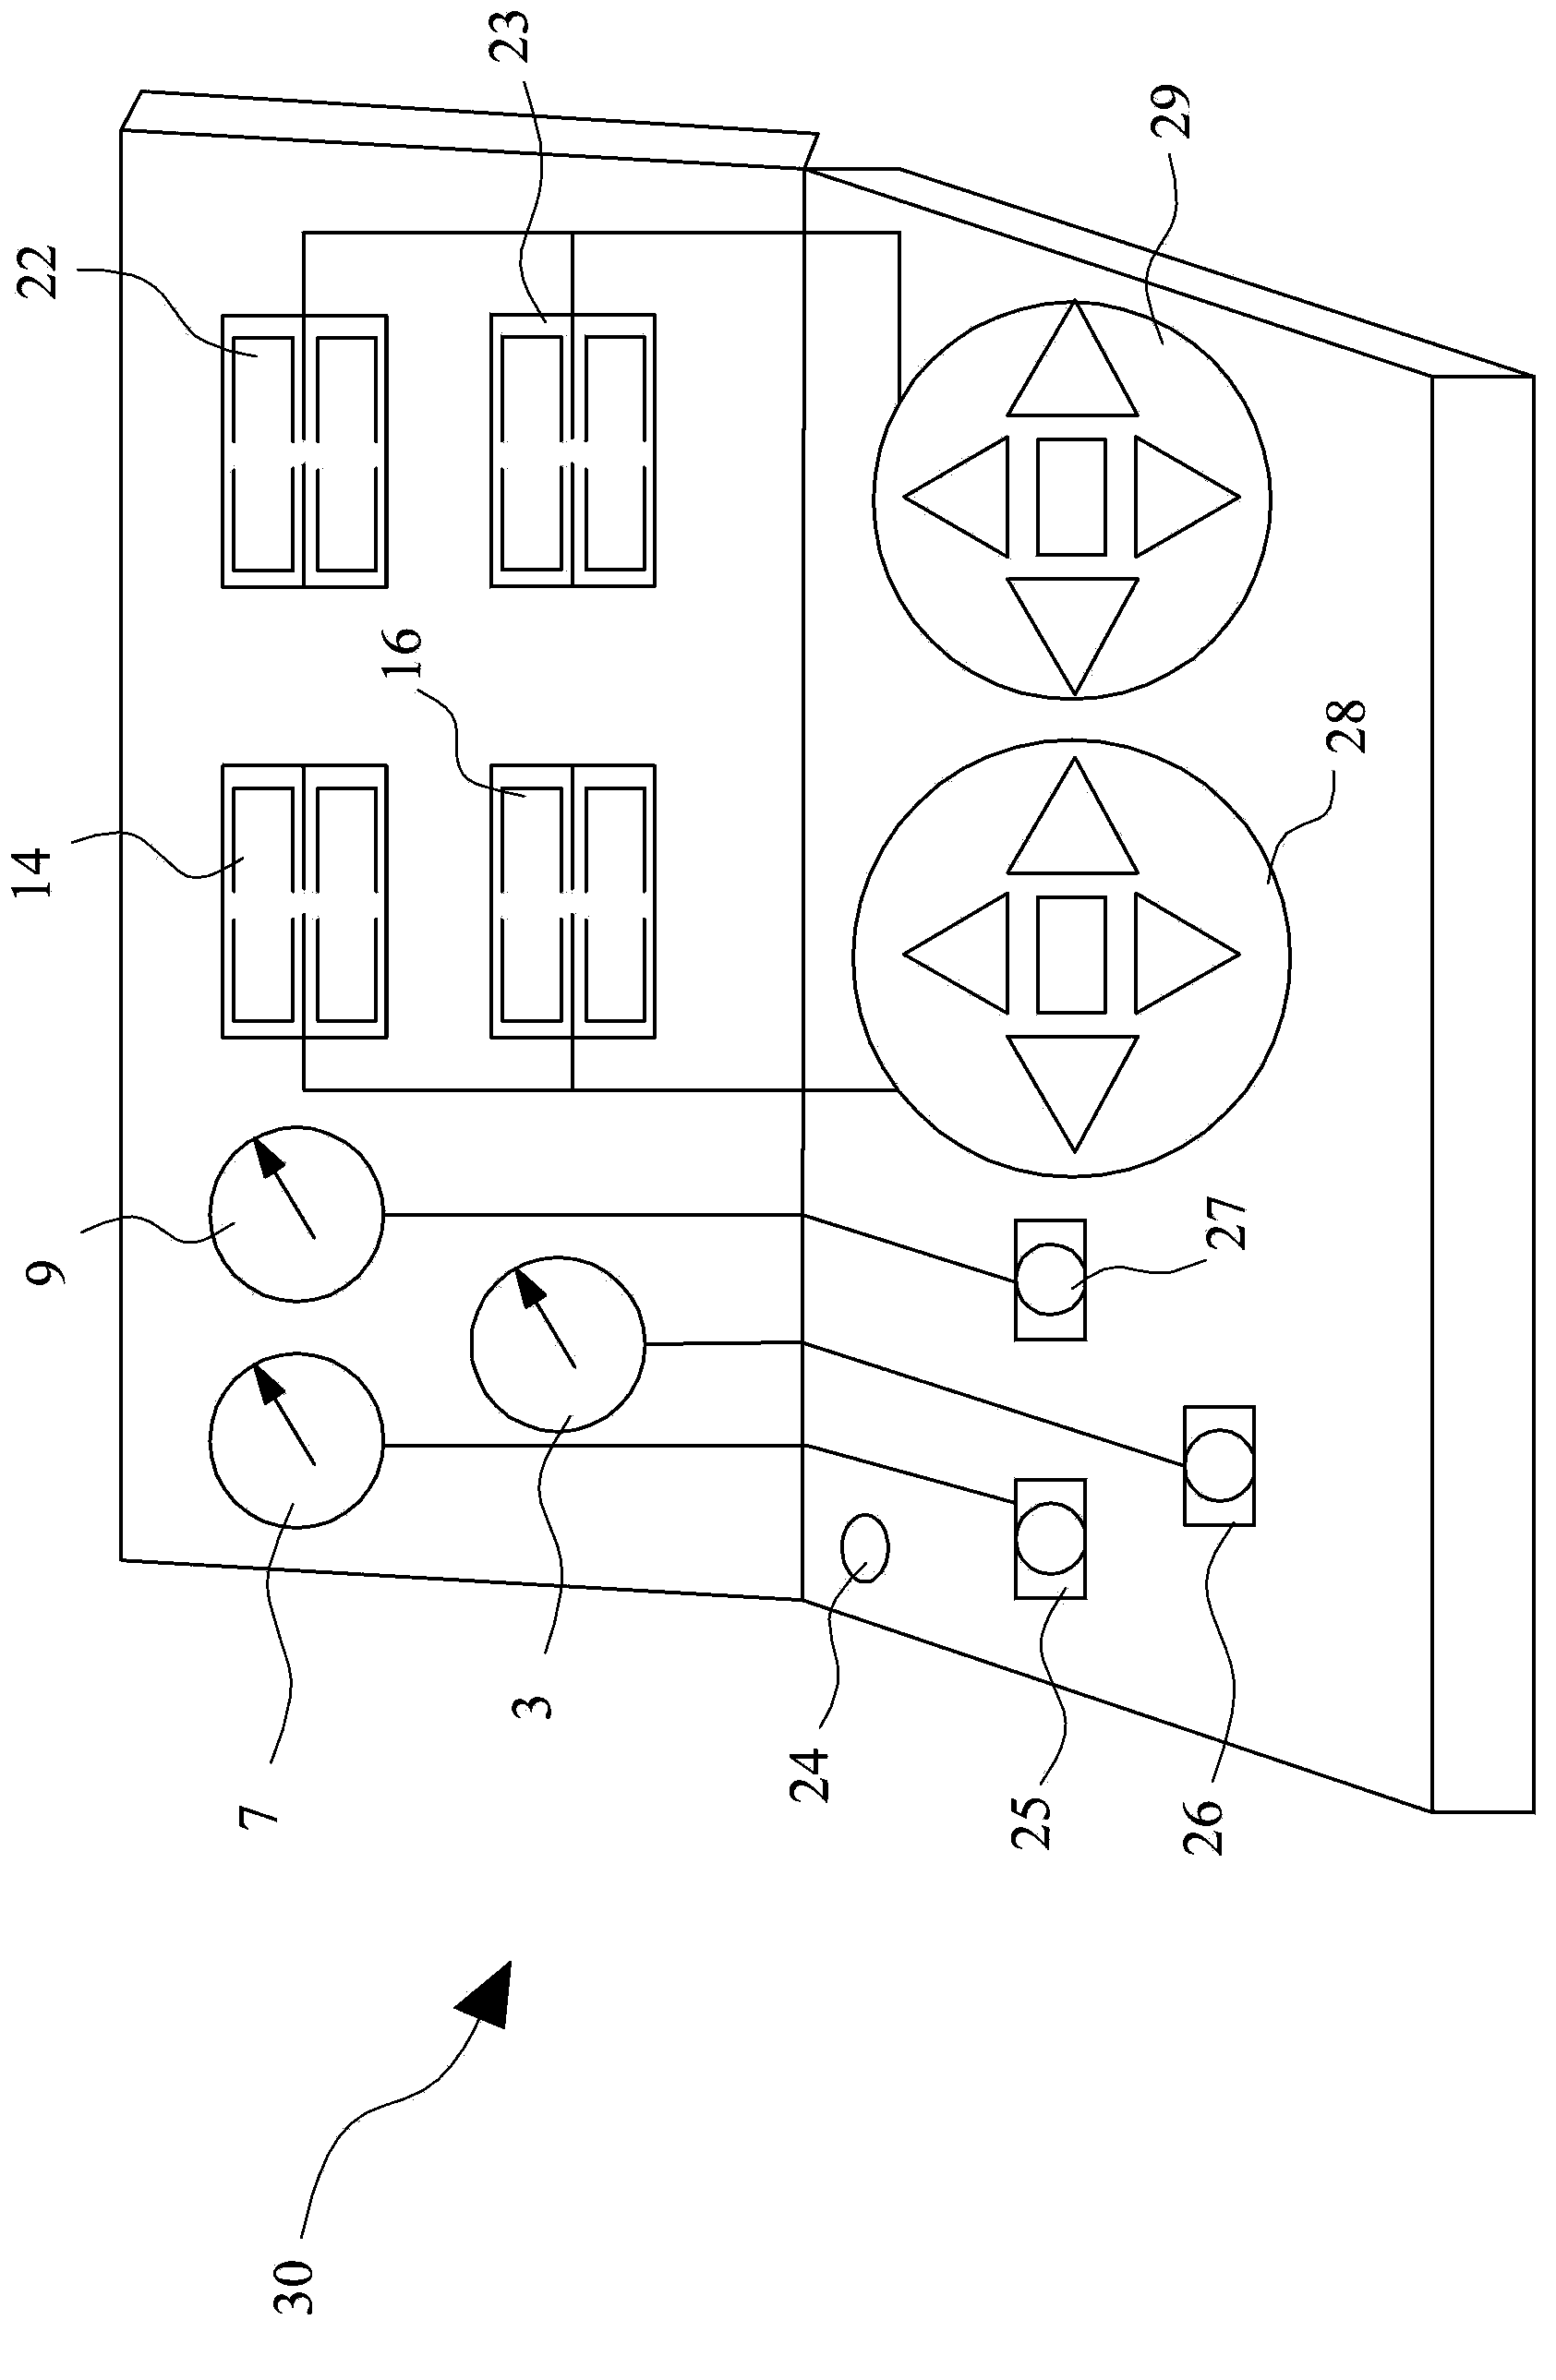 Supercritical fluid conveying device